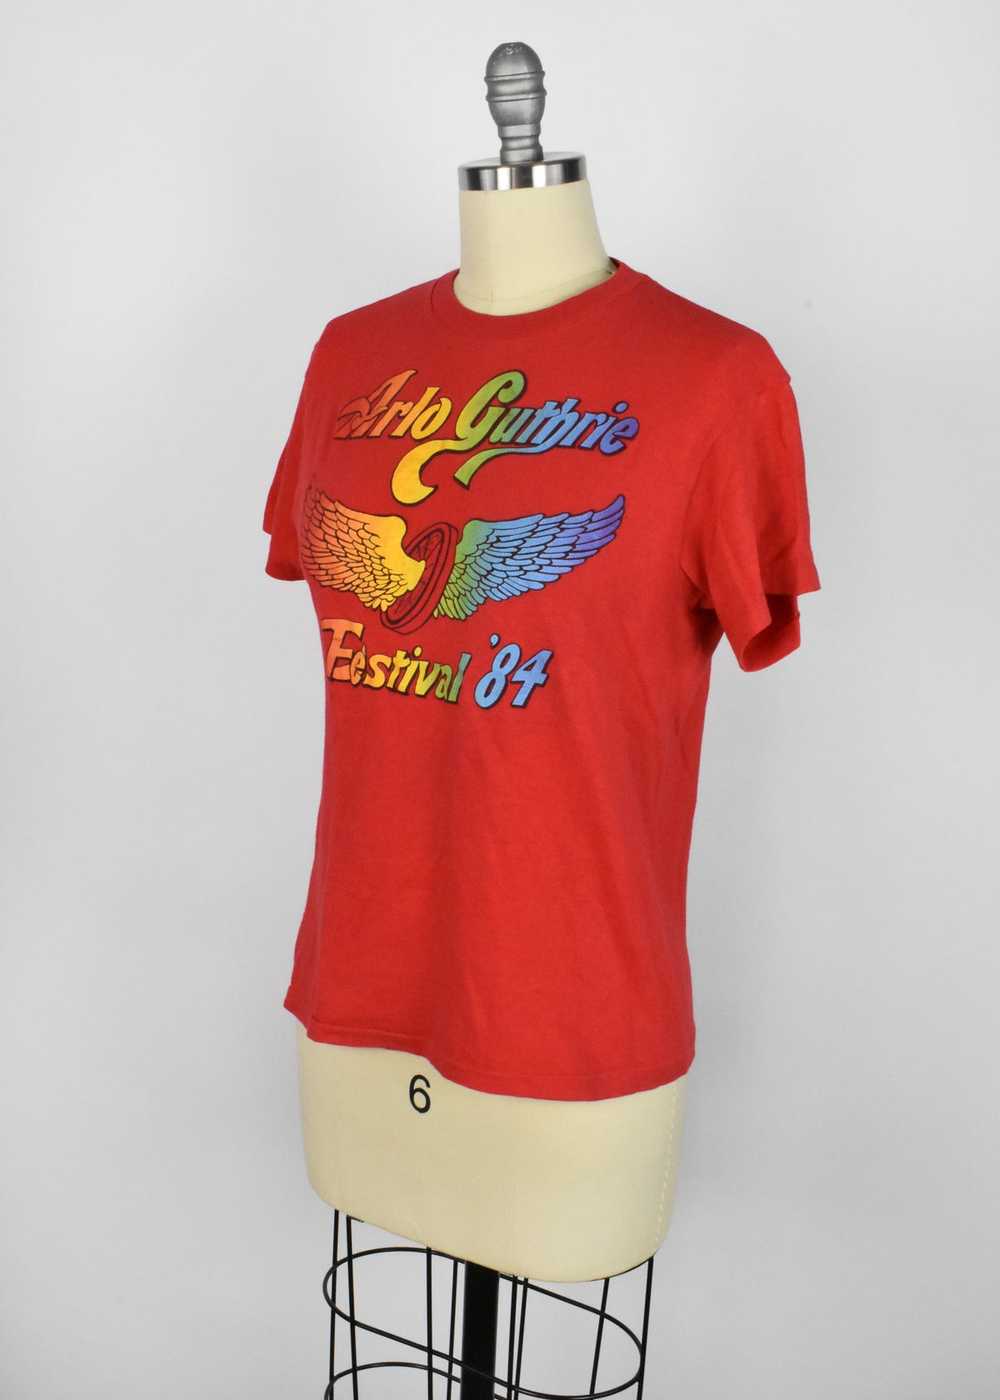 Arlo Guthrie Rolling Blunder Revival 1984 Tour T-… - image 6